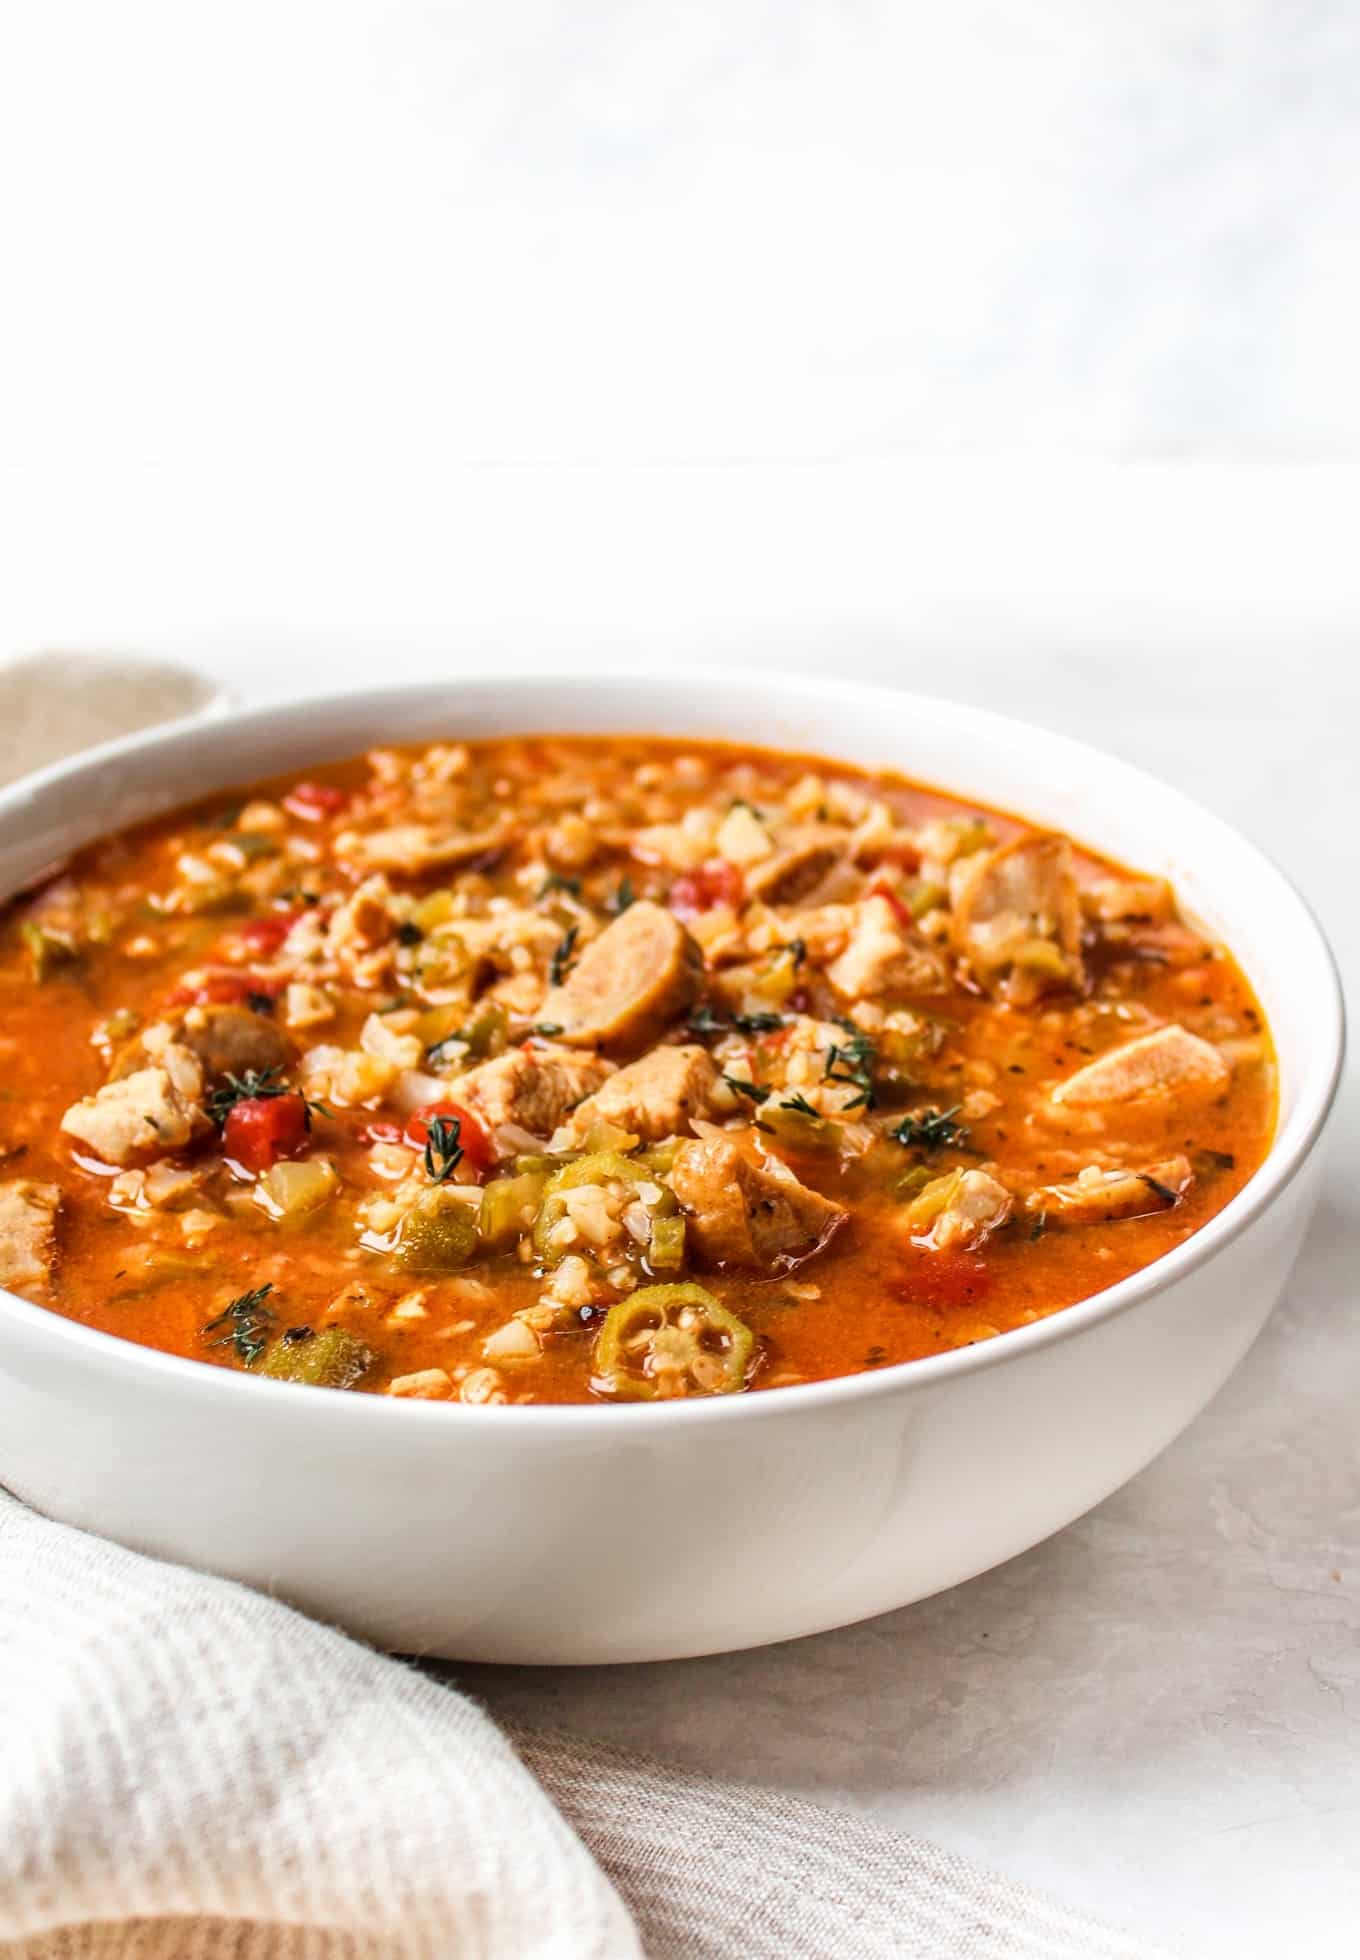 https://thewholecook.com/wp-content/uploads/2020/10/Chicken-Sausage-Gumbo-Soup-by-The-Whole-Cook-vertical.jpg